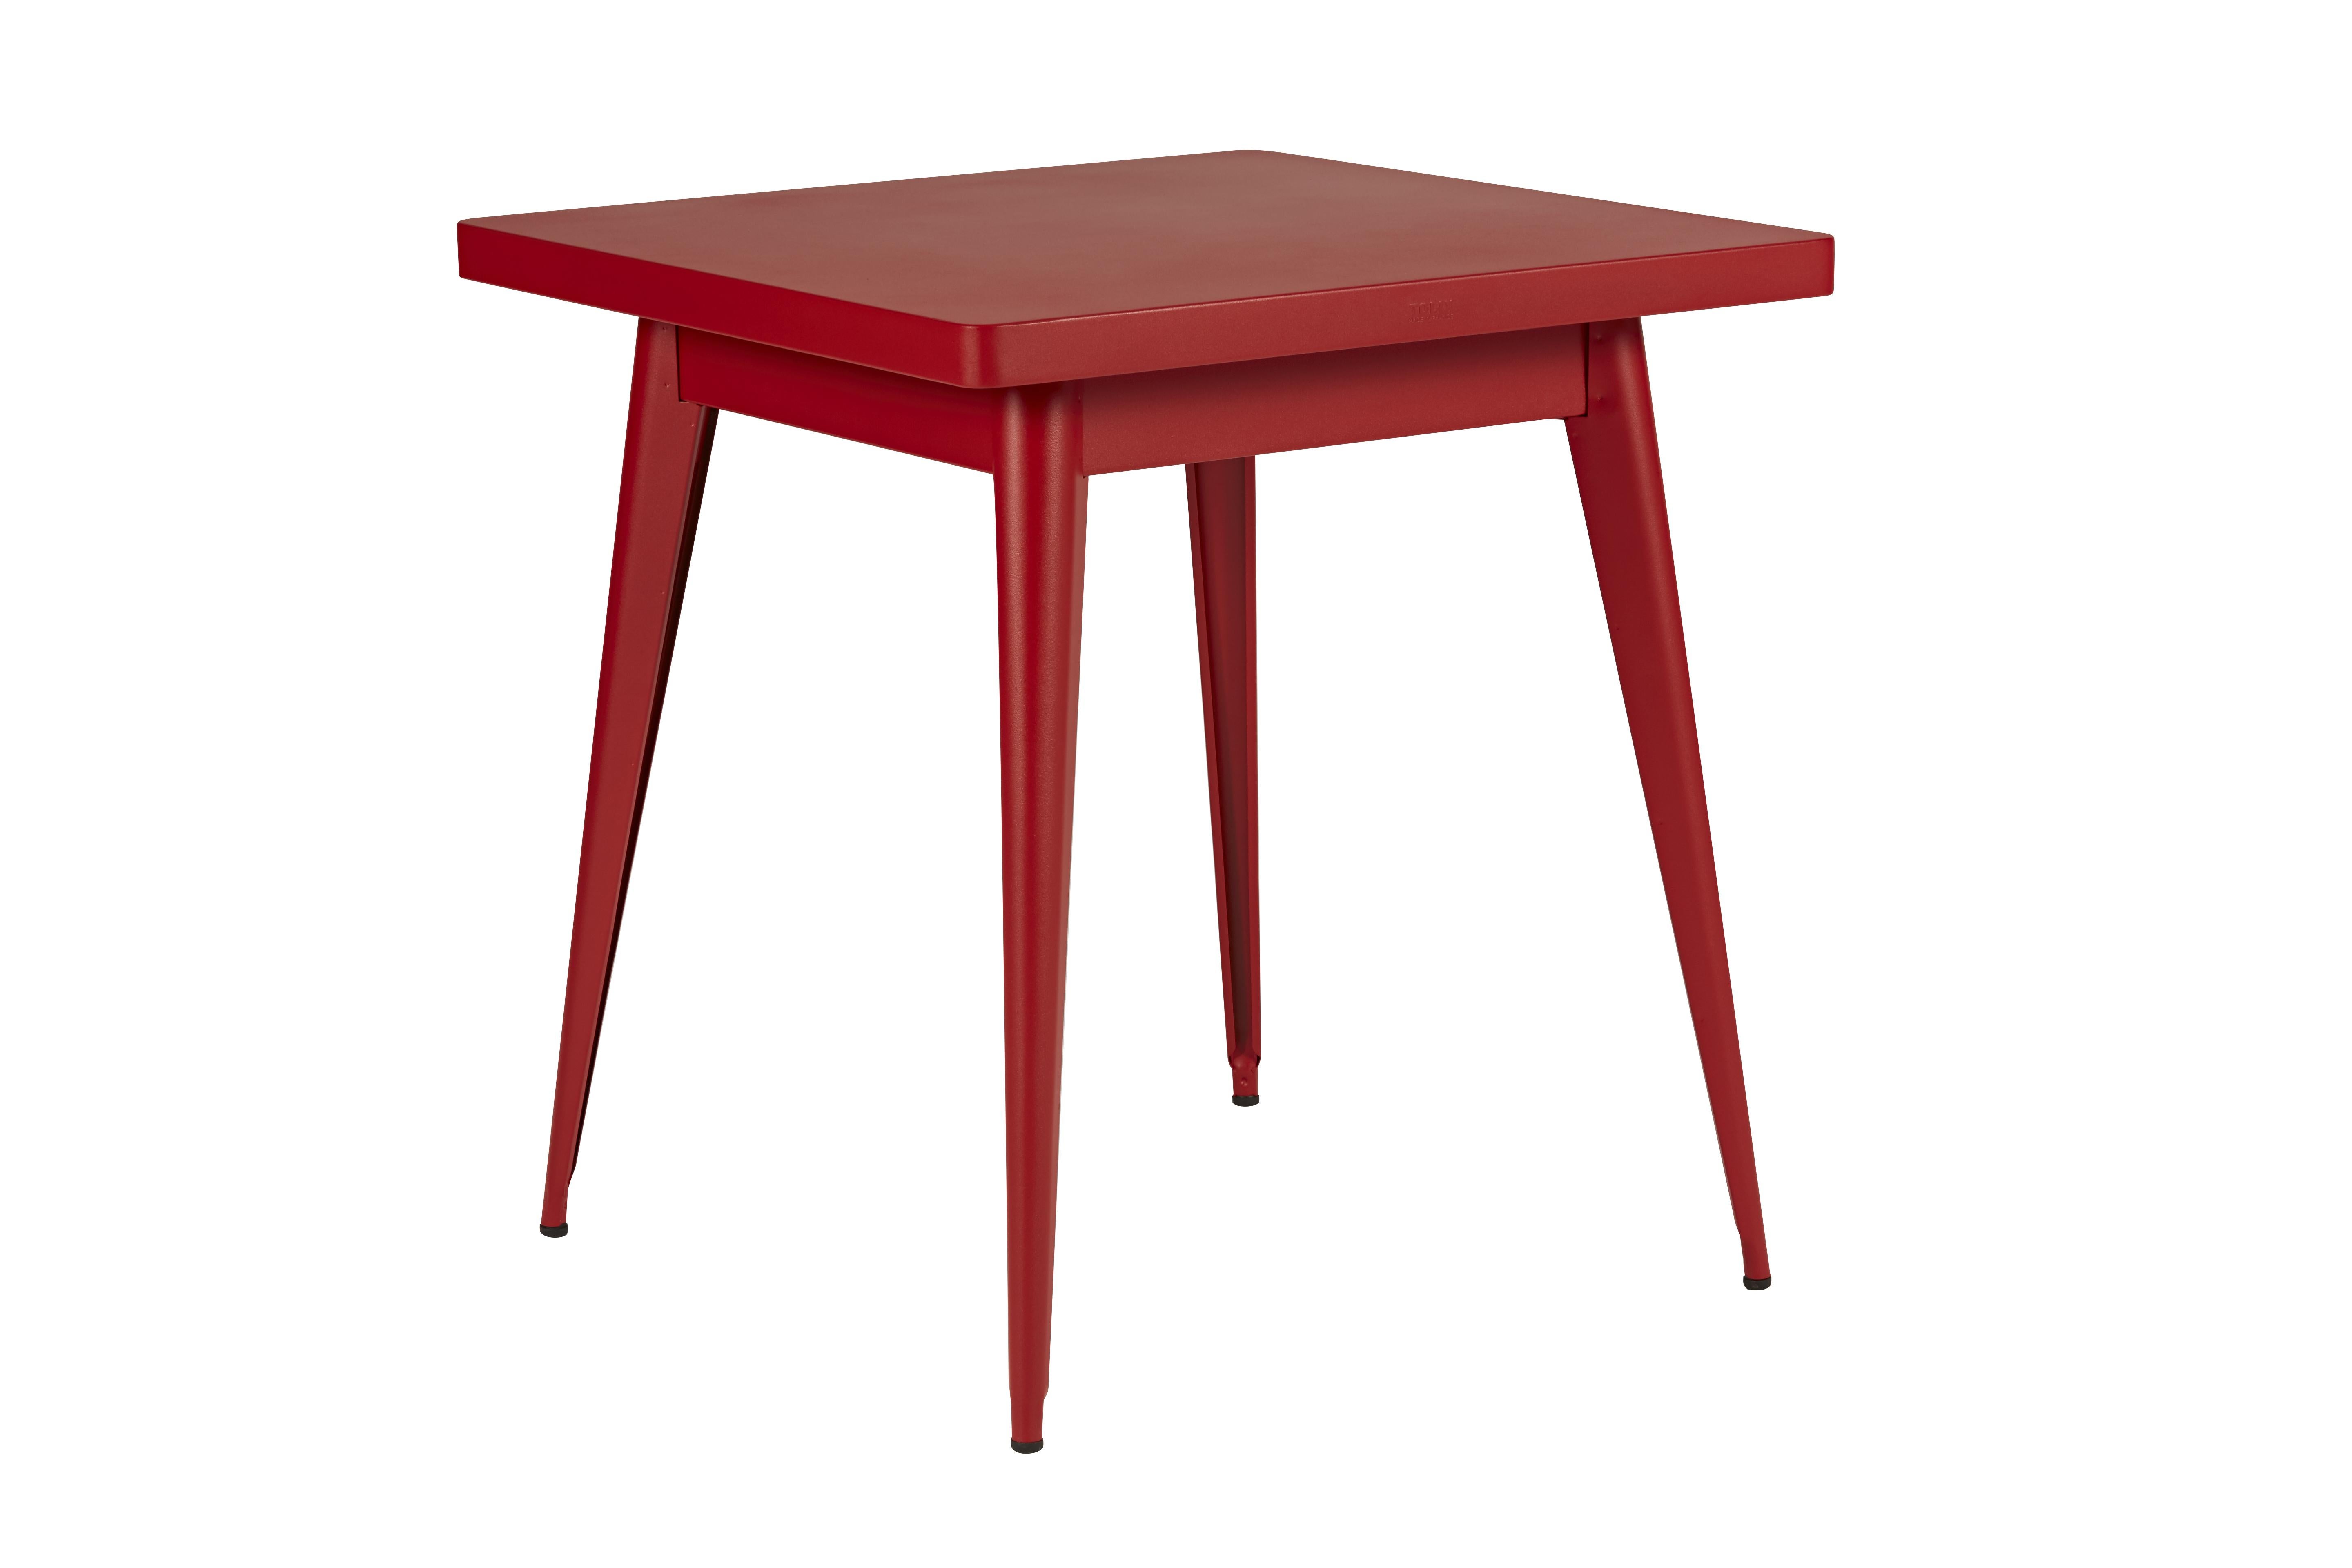 For Sale: Red (Piment) 55 Square Side Table 70x70 in Essential Colors by Jean Pauchard & Tolix 2